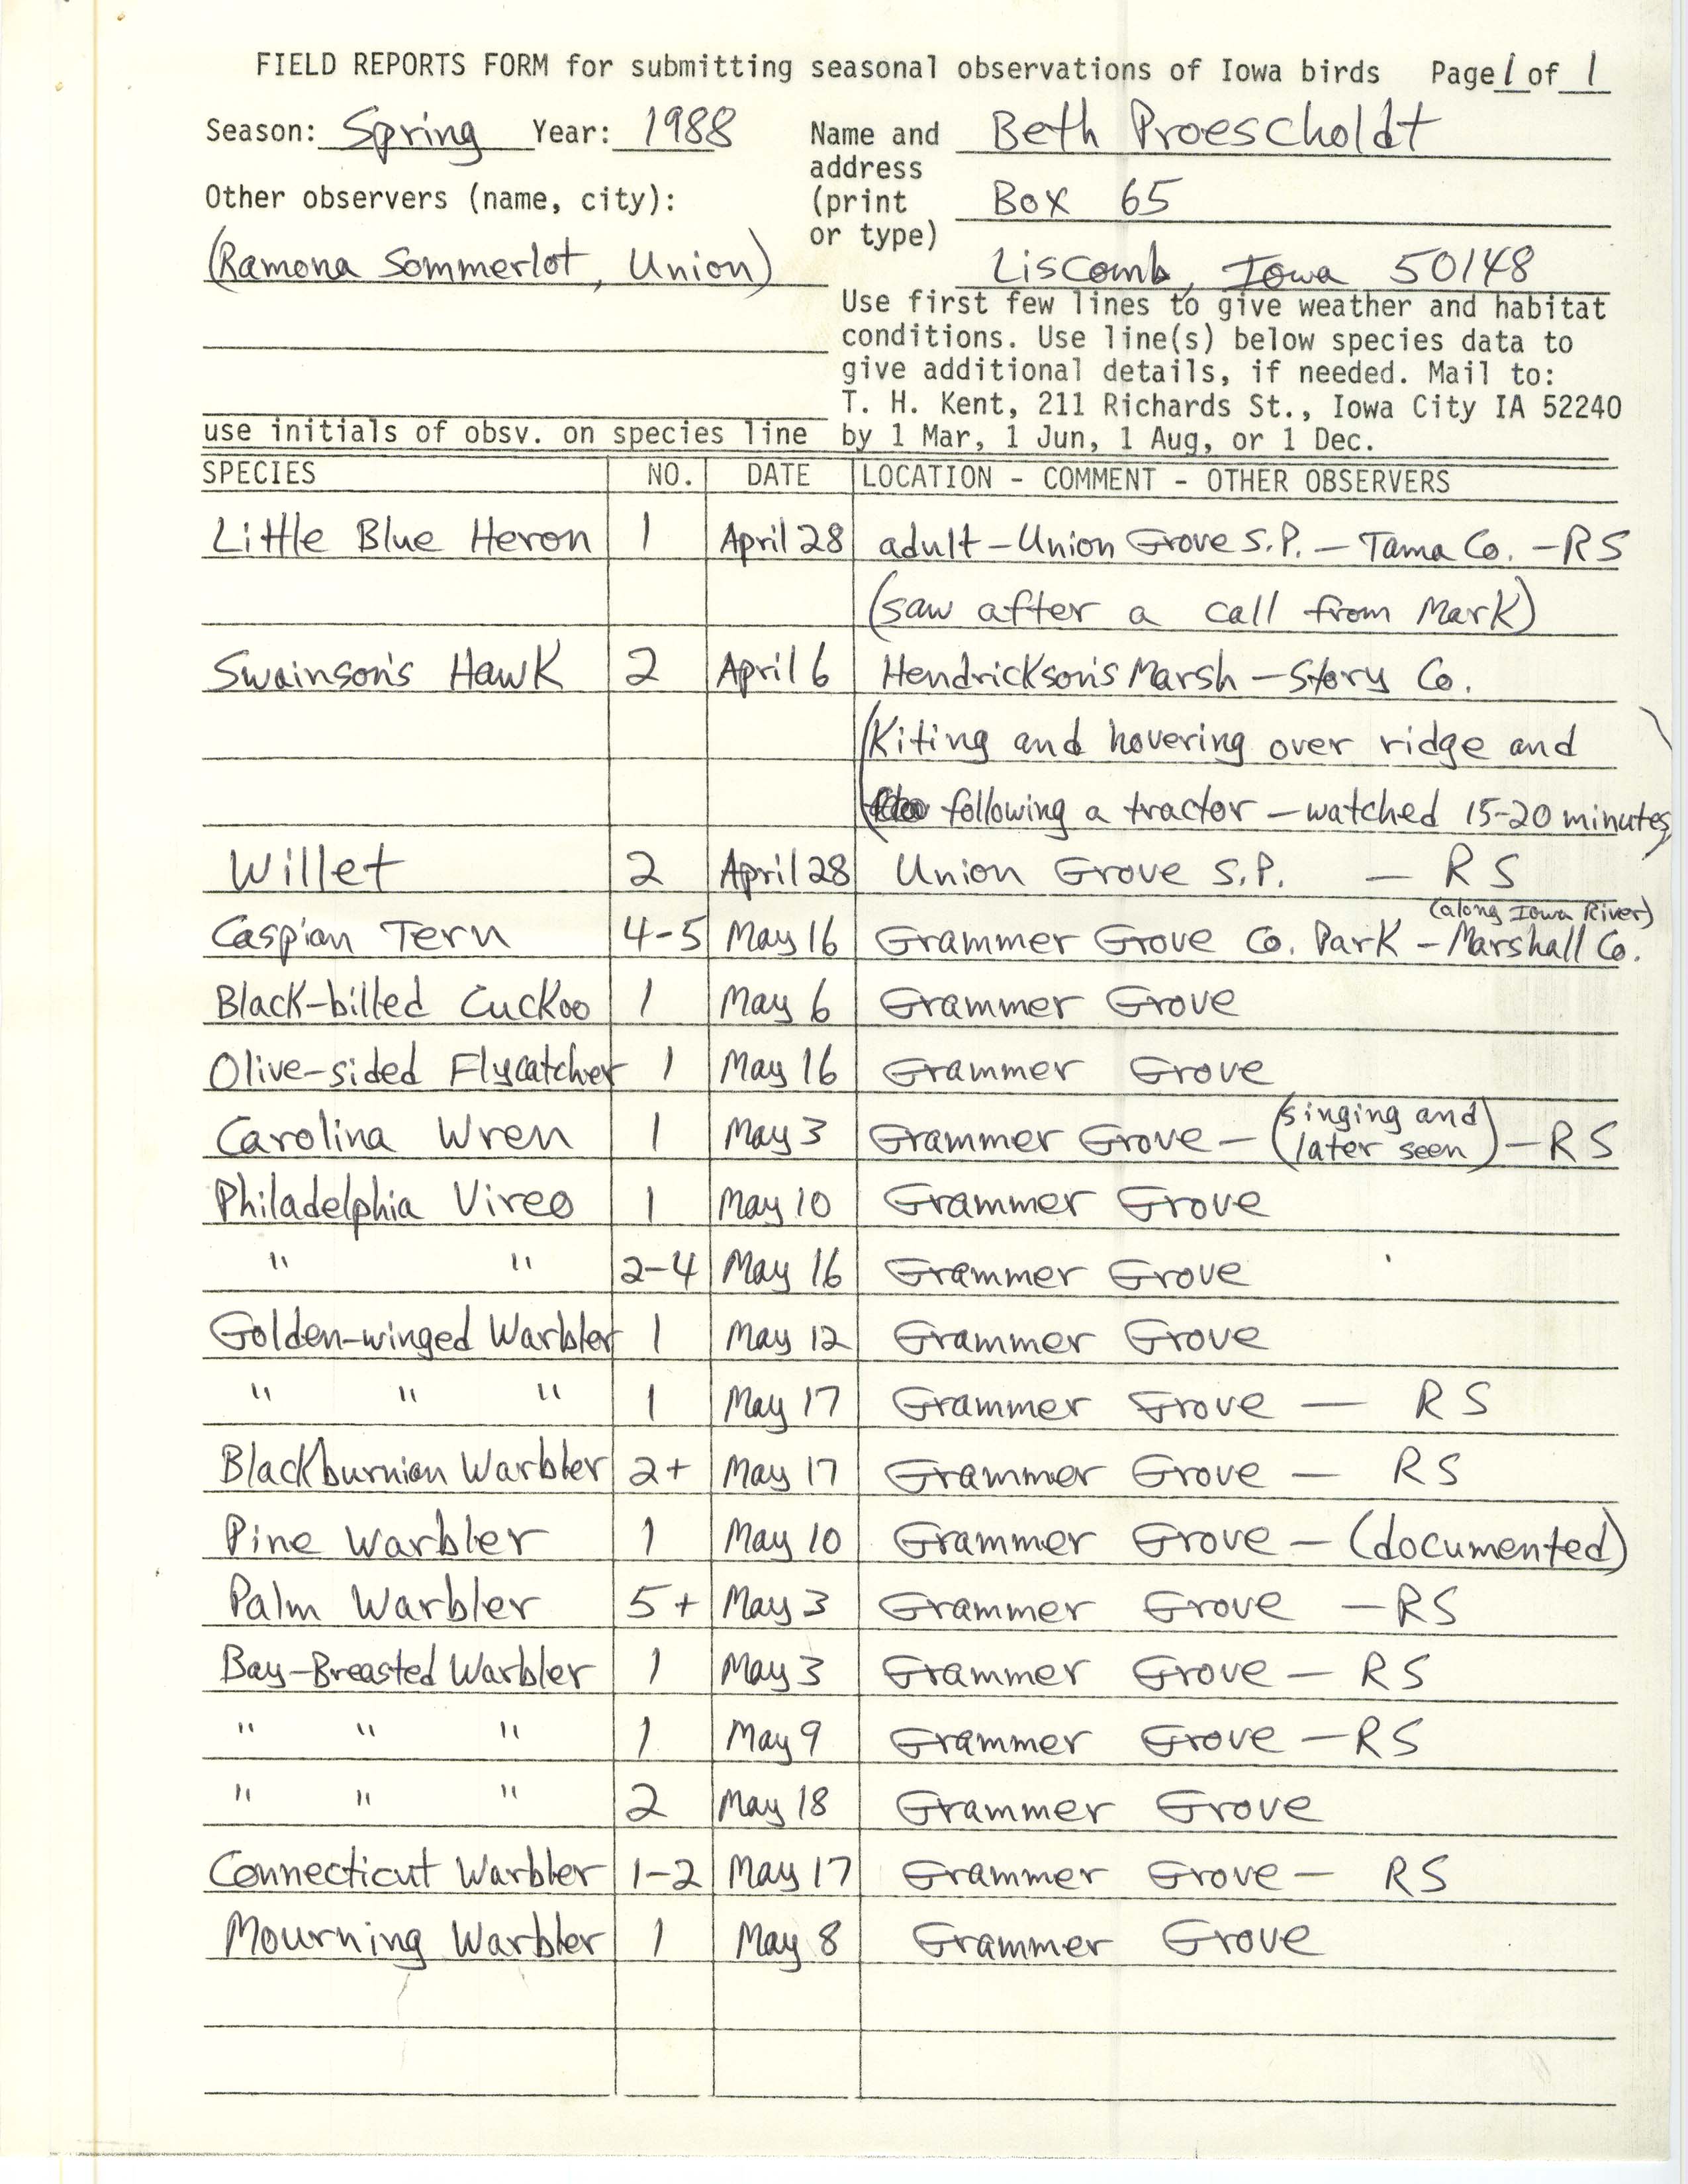 Field reports form for submitting seasonal observations of Iowa birds, Beth Proescholdt, spring 1988